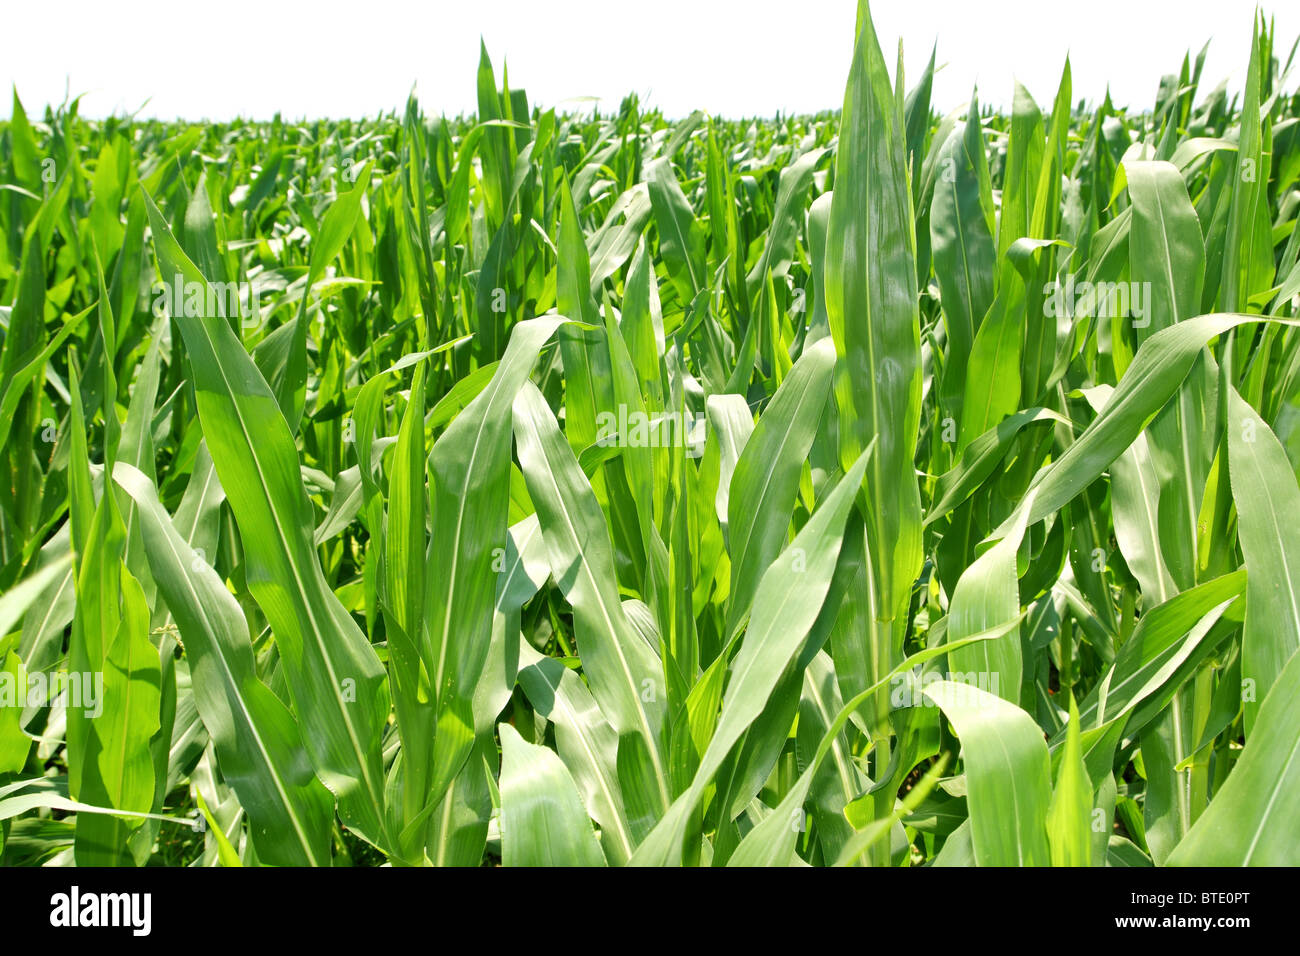 agriculture corn plants field green plantation texture Stock Photo